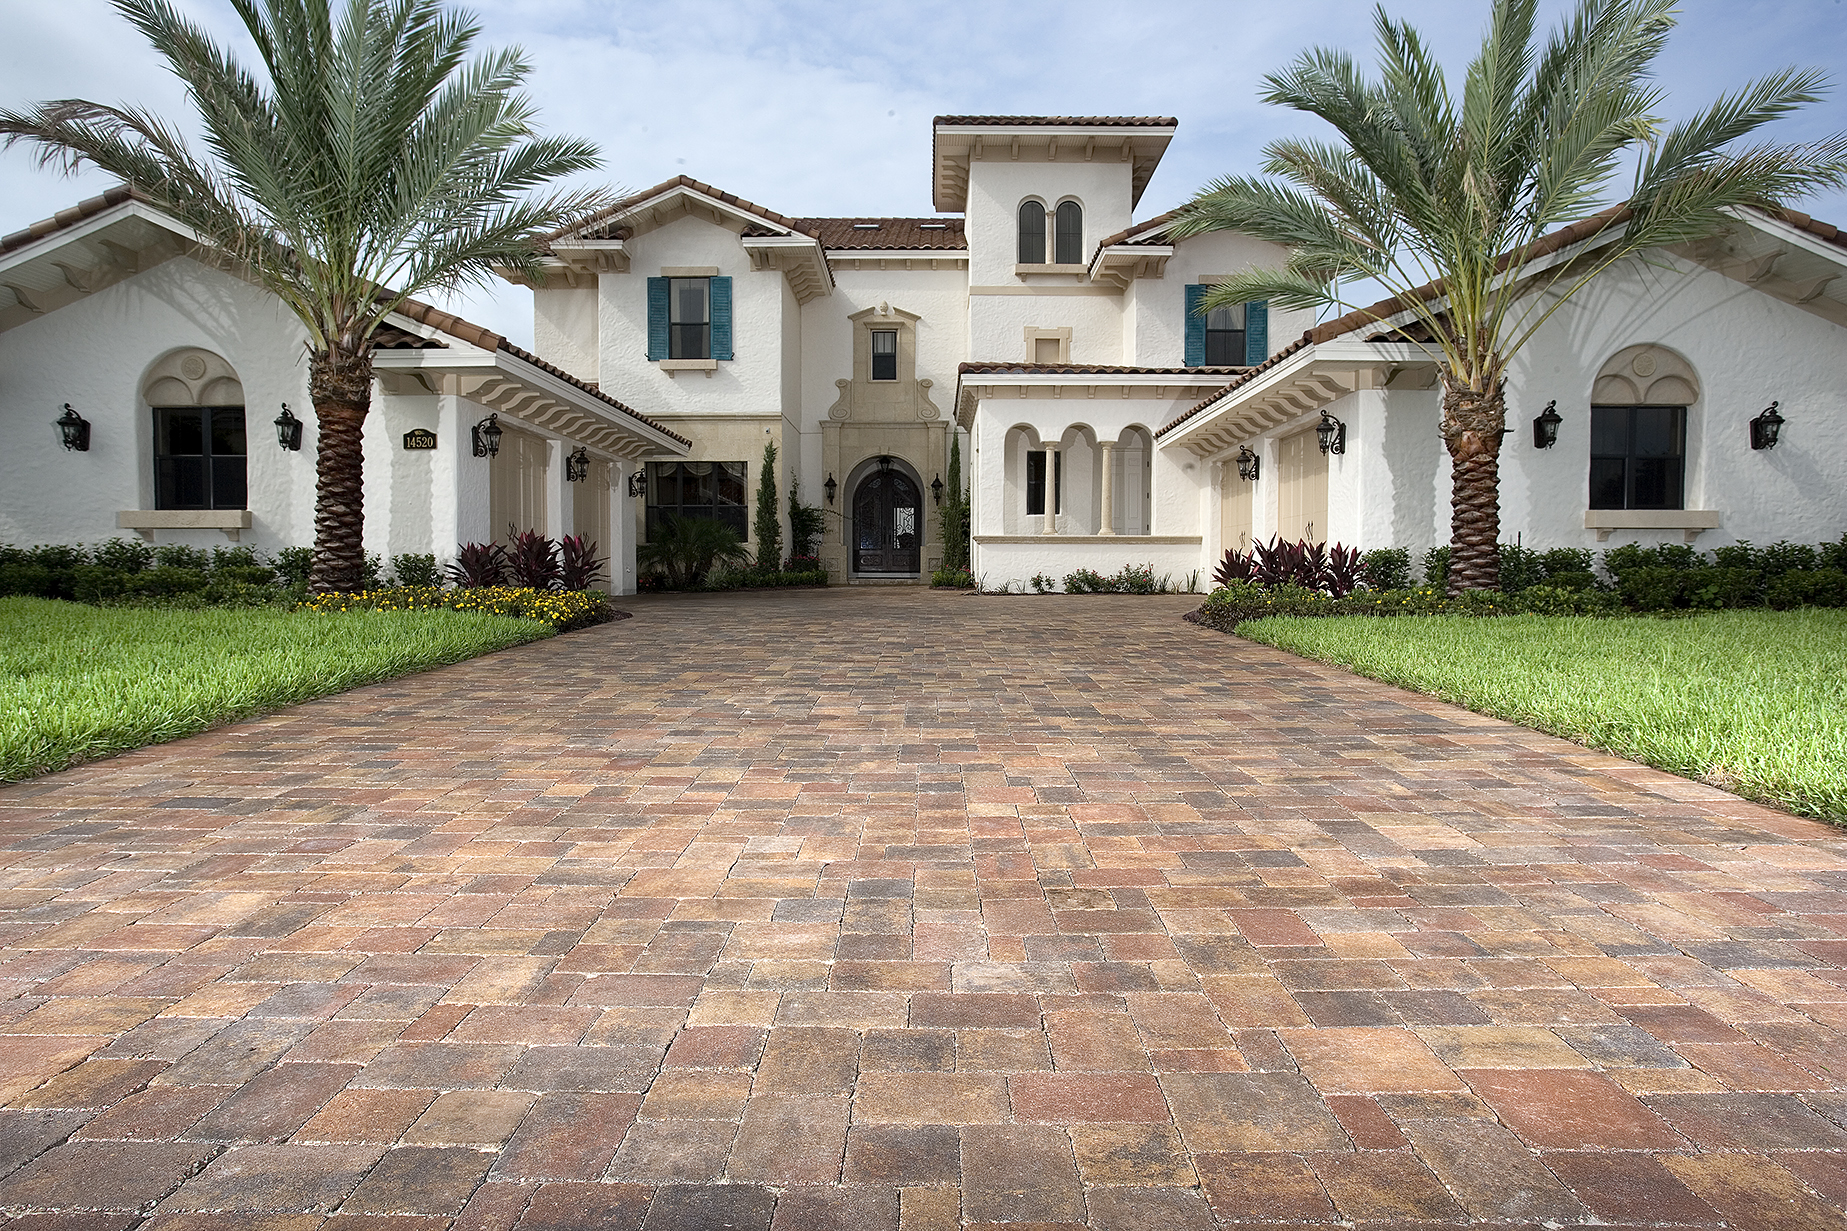 Masonry Hardscape images by Mike Butler Pavers